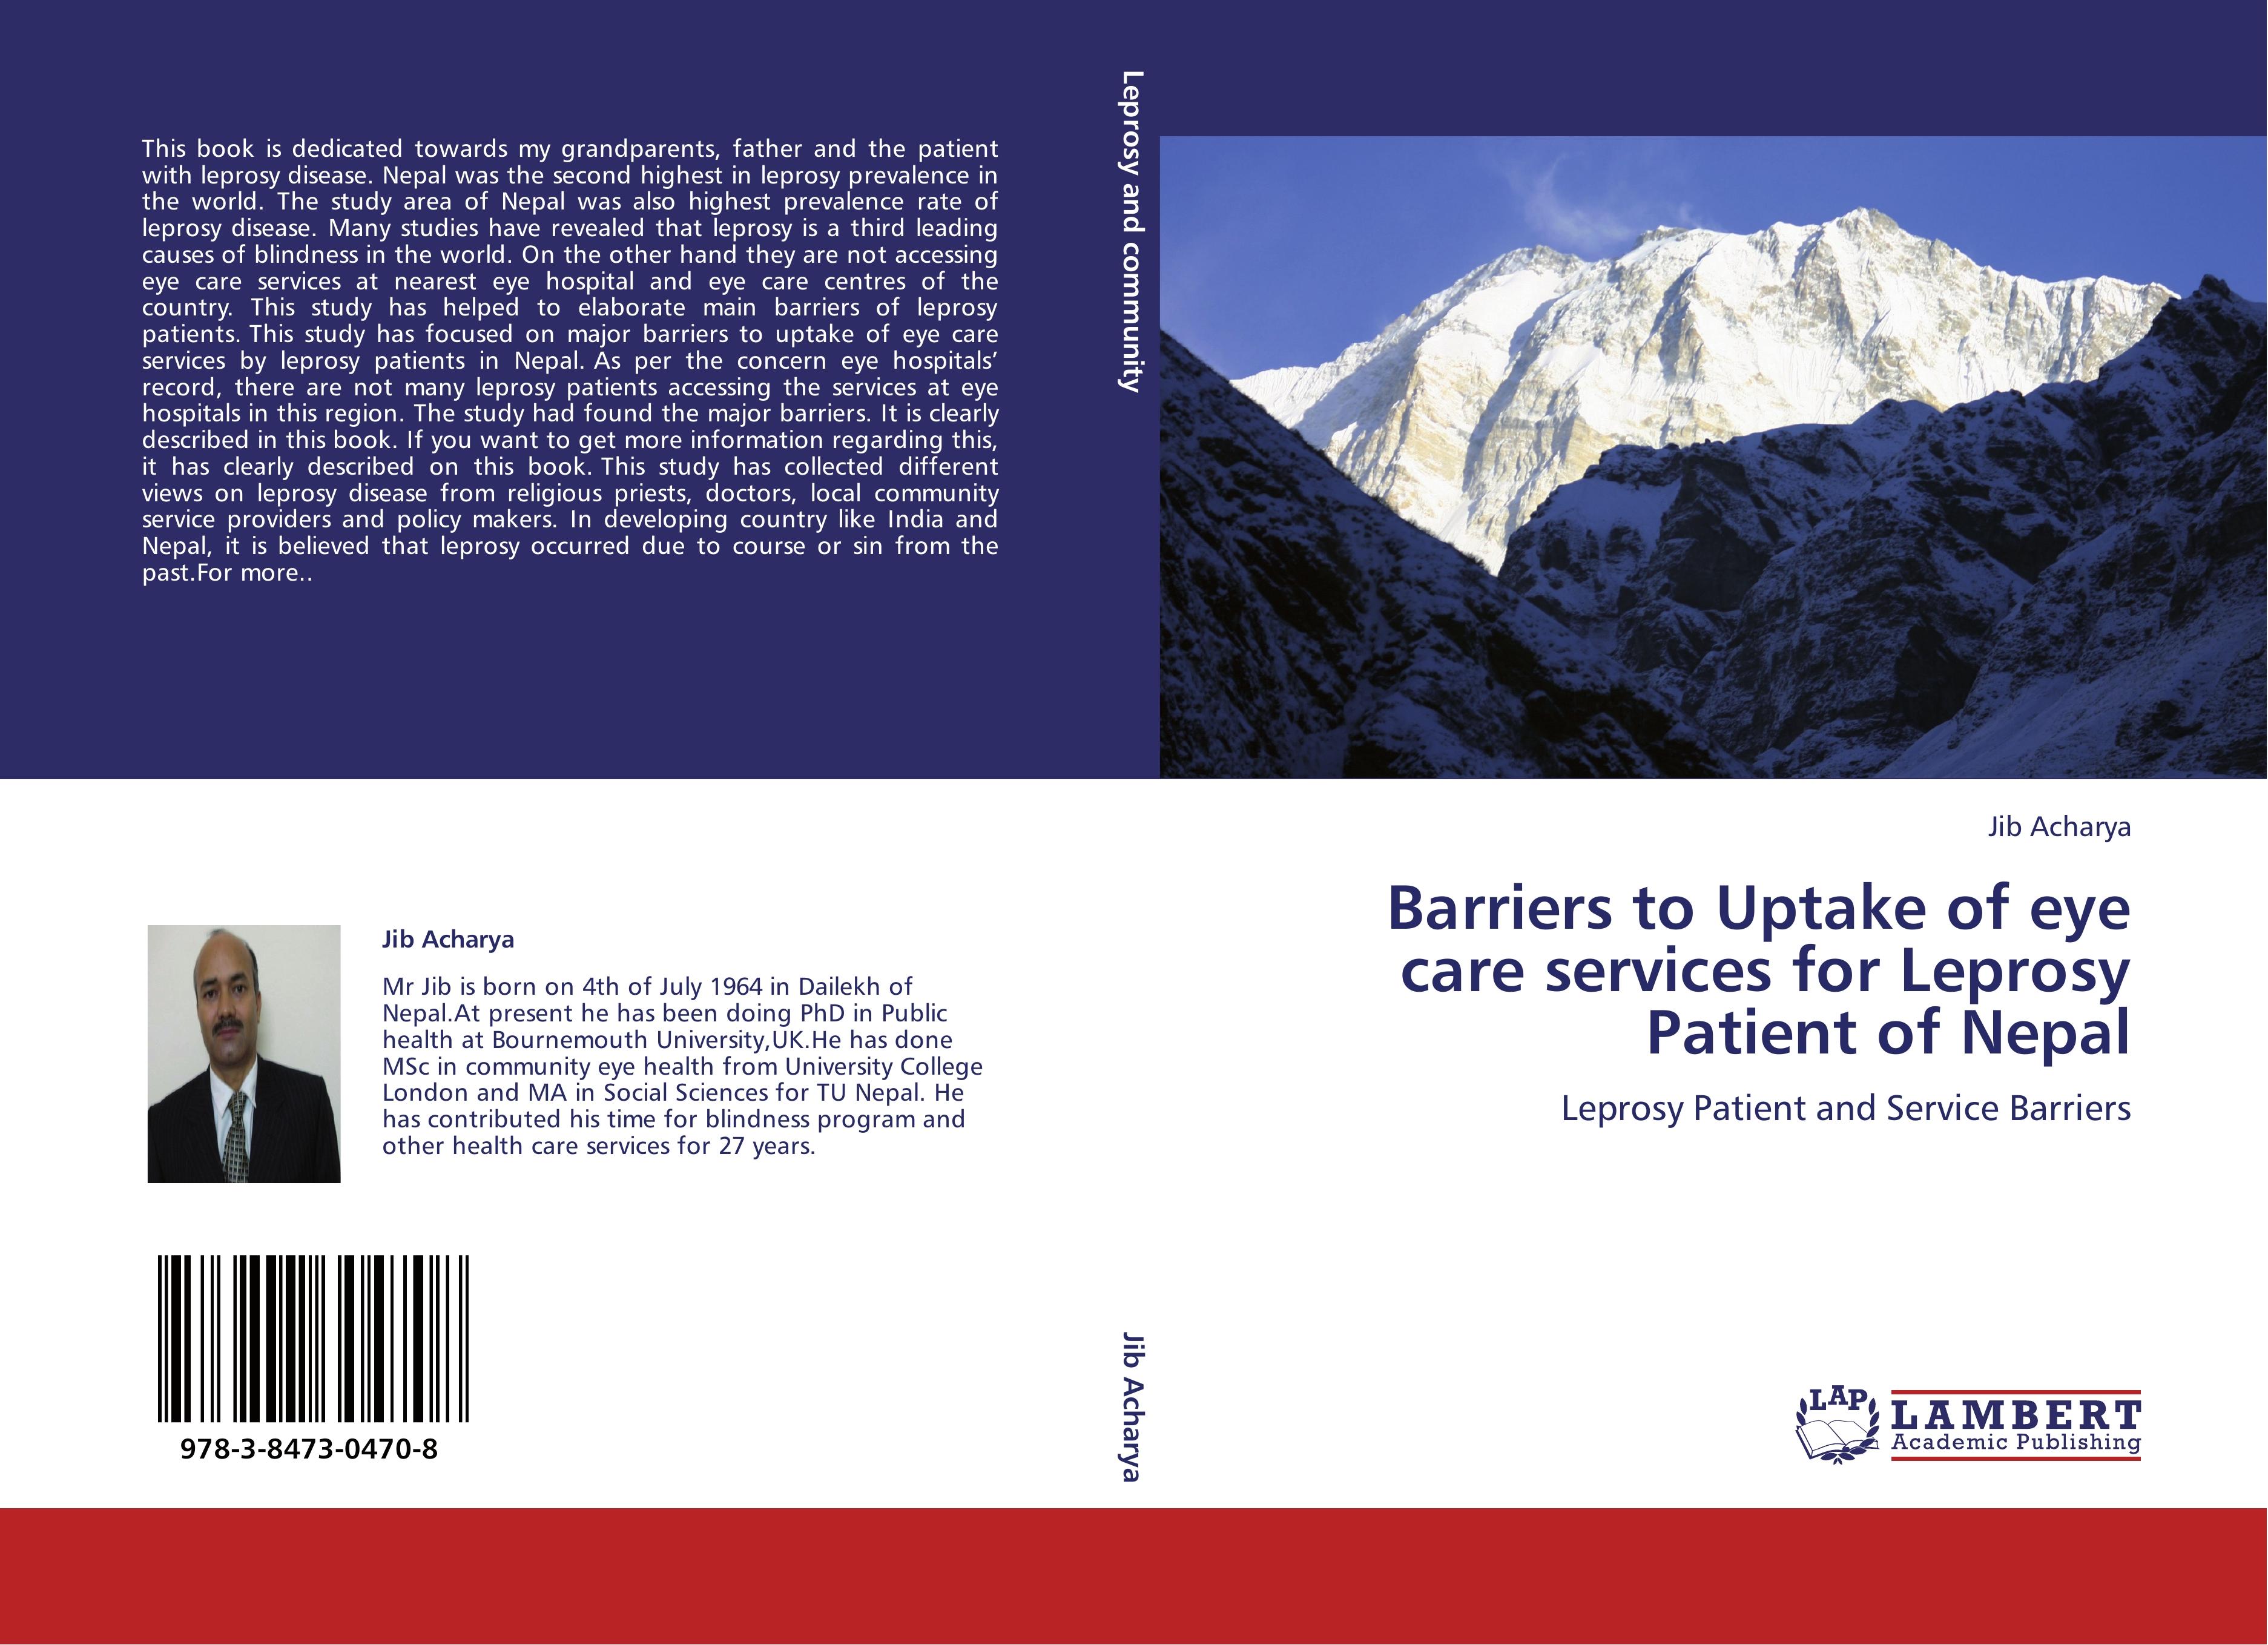 Barriers to Uptake of eye care services for Leprosy Patient of Nepal - Jib Acharya